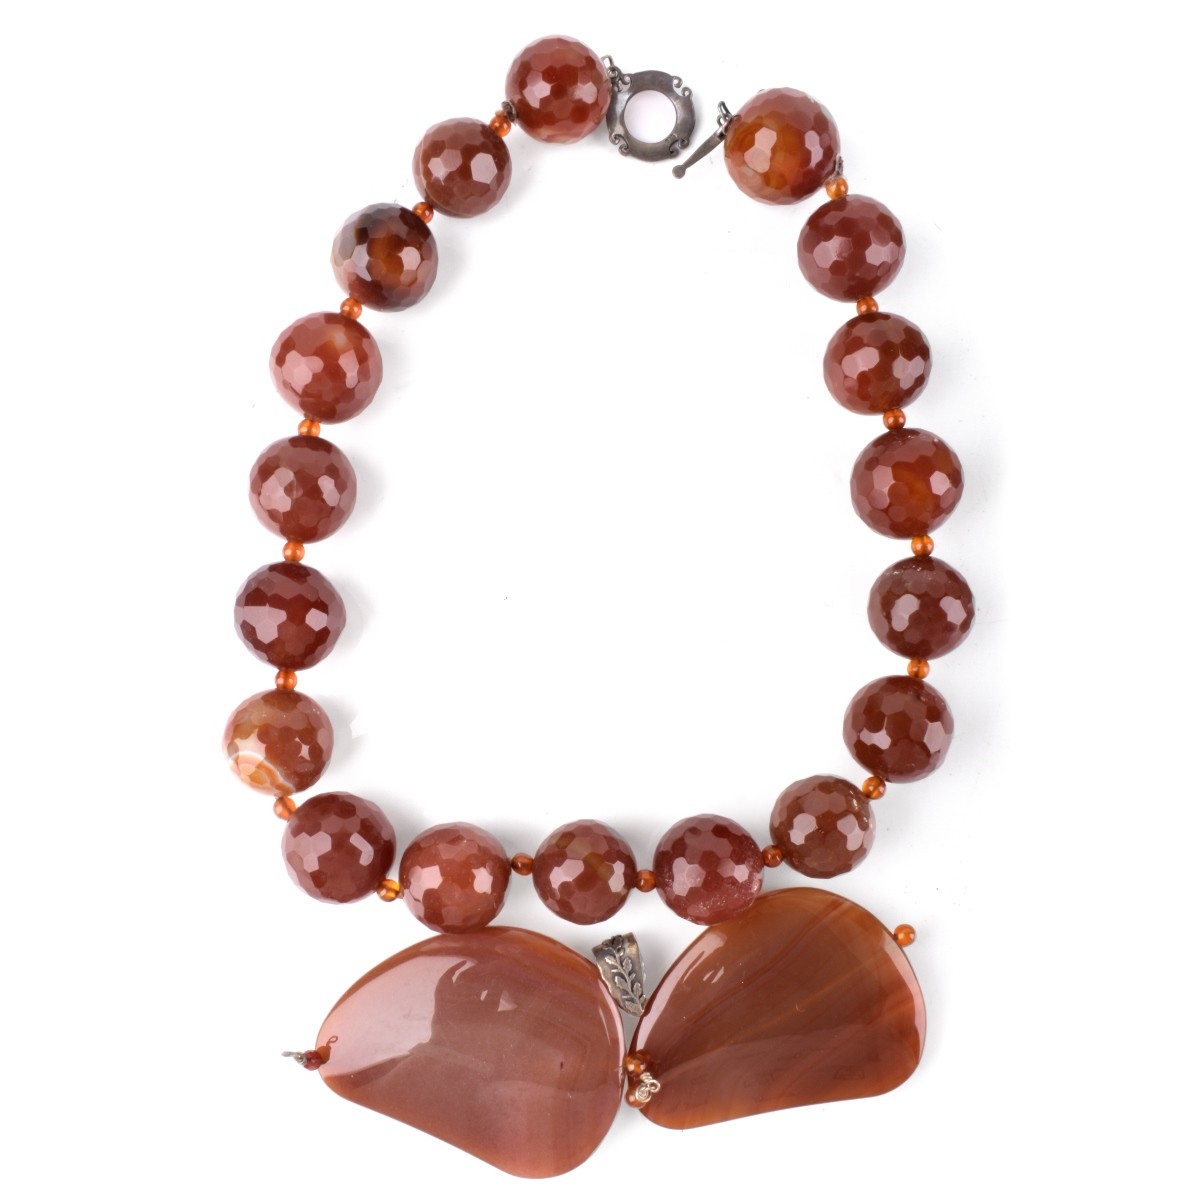 Carnelian and Agate Necklaces